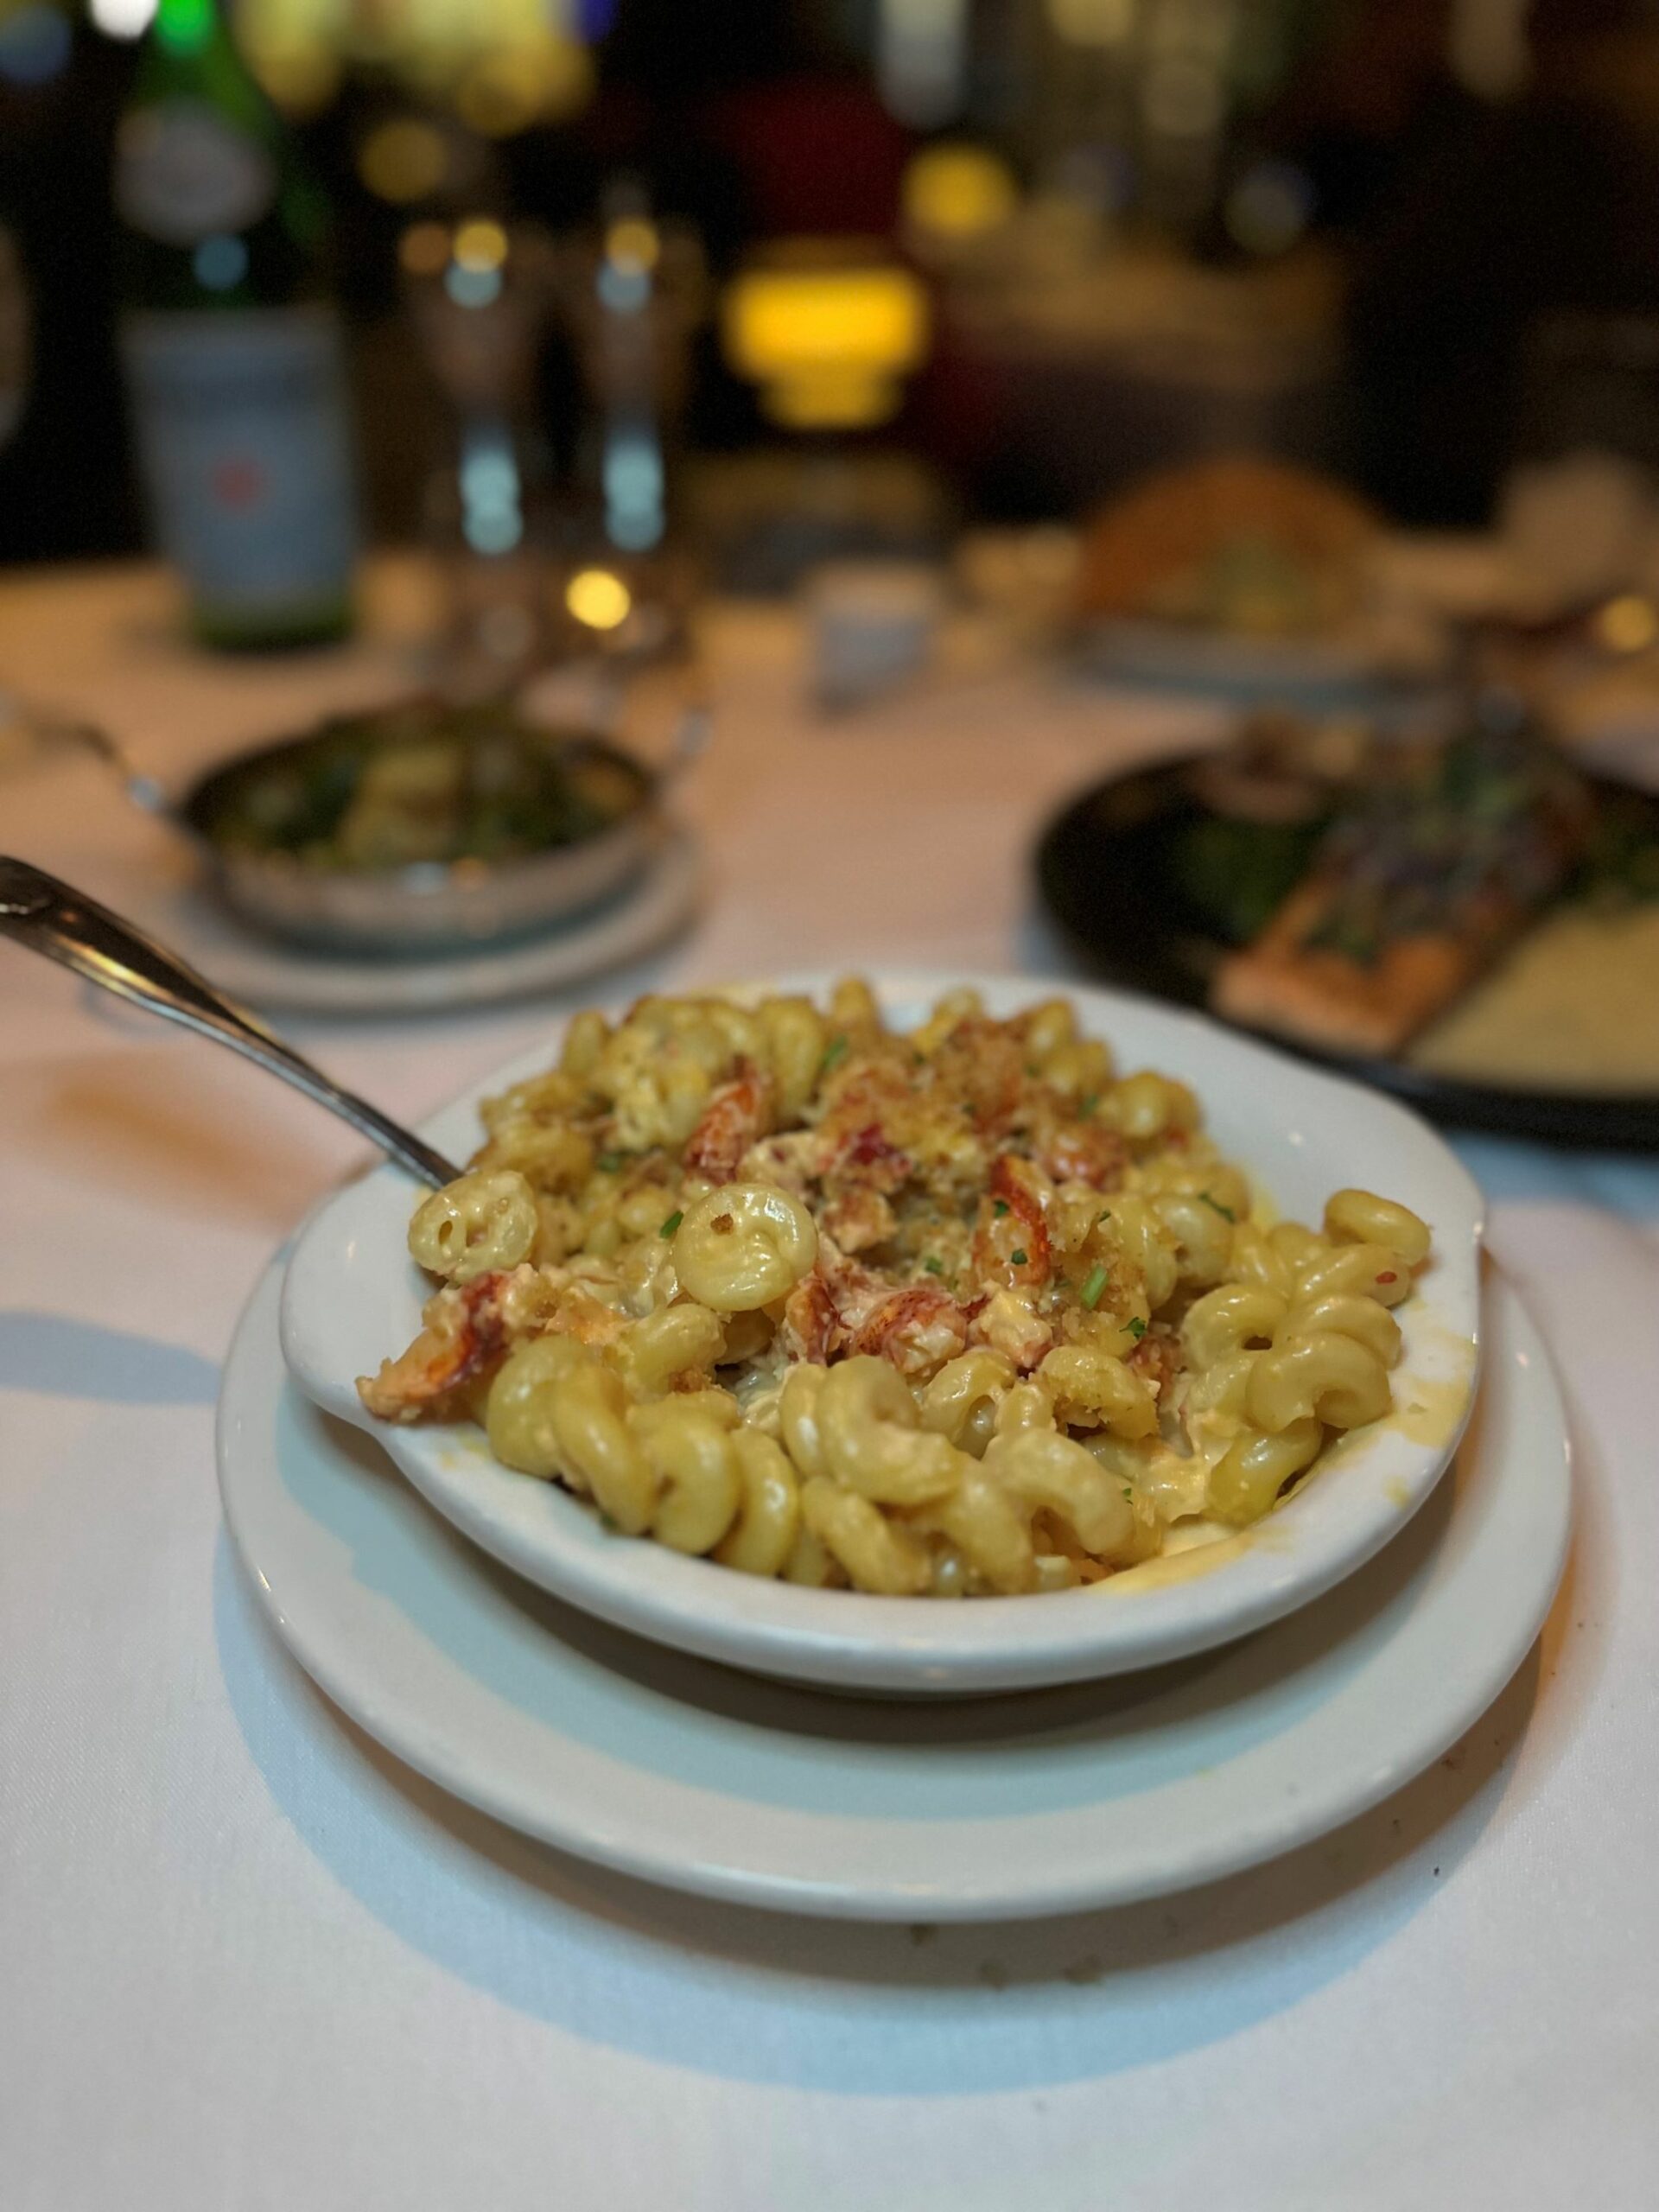 An image of the gooey and decadent Lobster Macaroni and Cheese.  